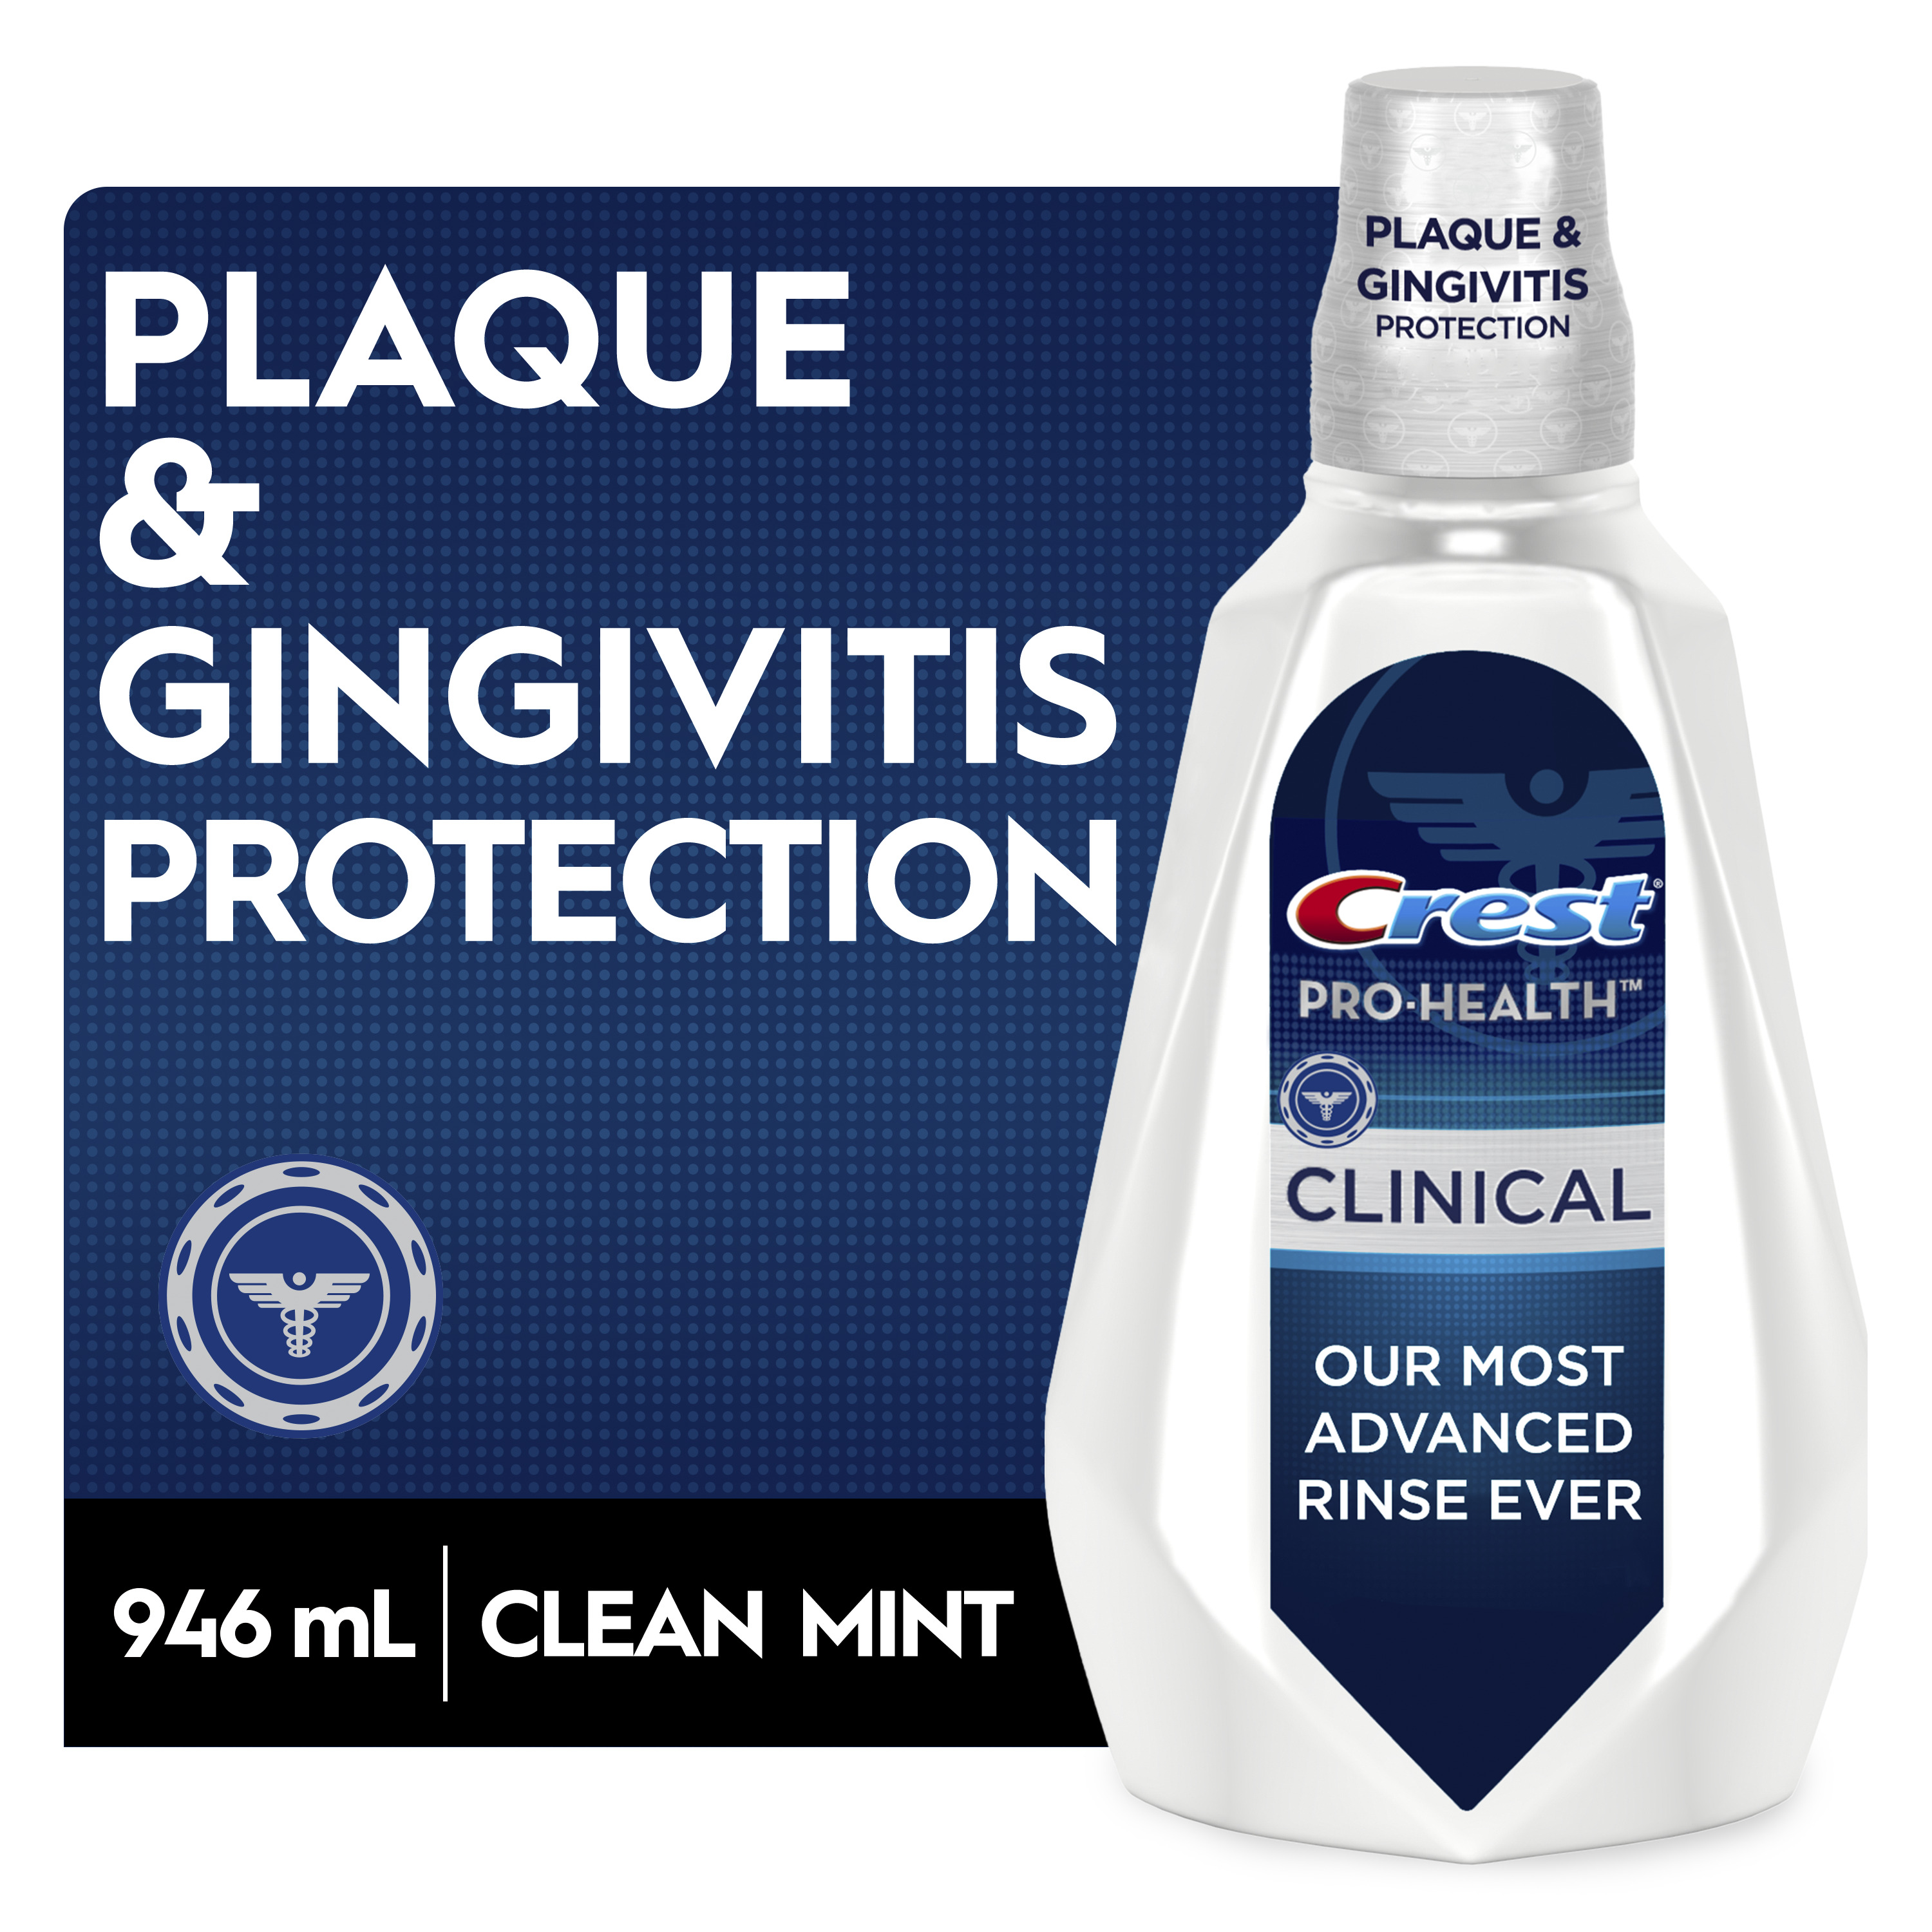 Crest Pro-Health Clinical Mouthwash/Mouth Rinse, Deep Clean Mint - 946 mL, Antigingivitis & Antiplaque, Alcohol Free - image 1 of 7